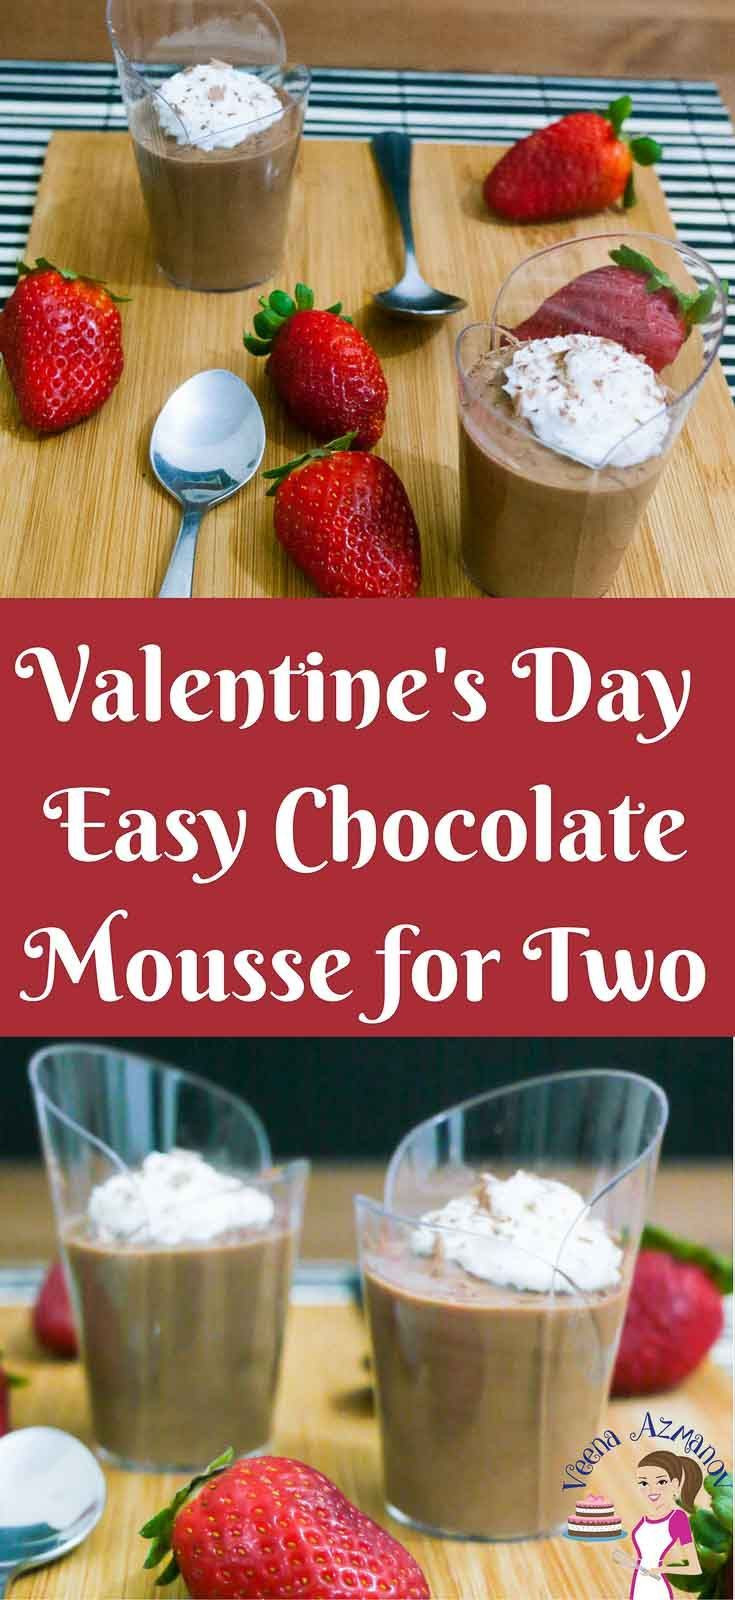 Valentine'S Day Desserts For Two
 This easy chocolate mousse for two makes a perfect